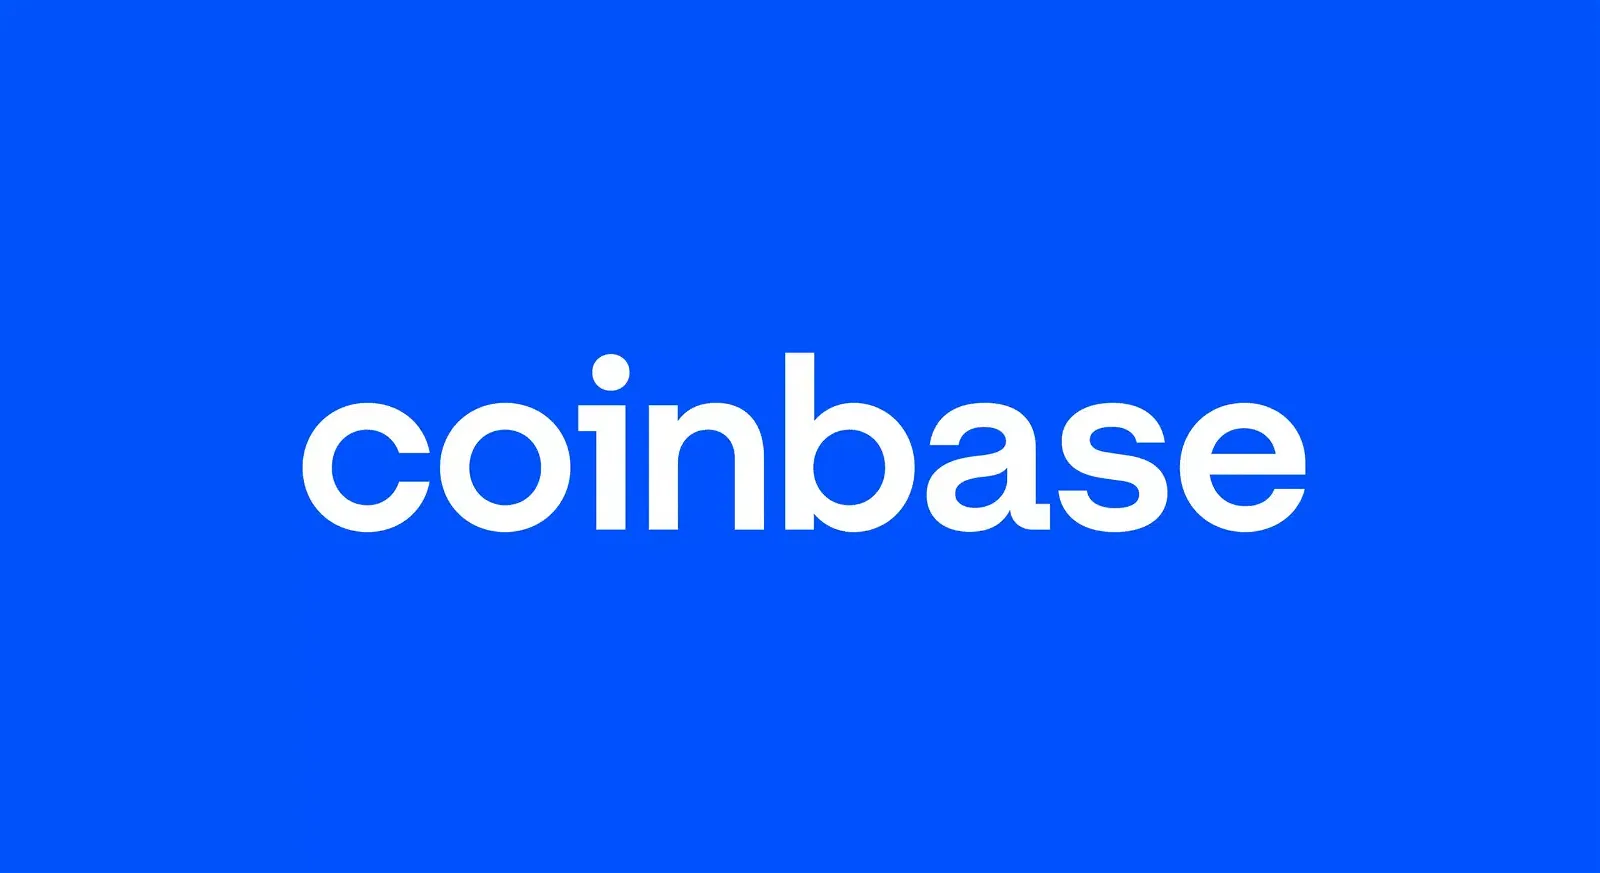 how long does it take for coinbase to verify id